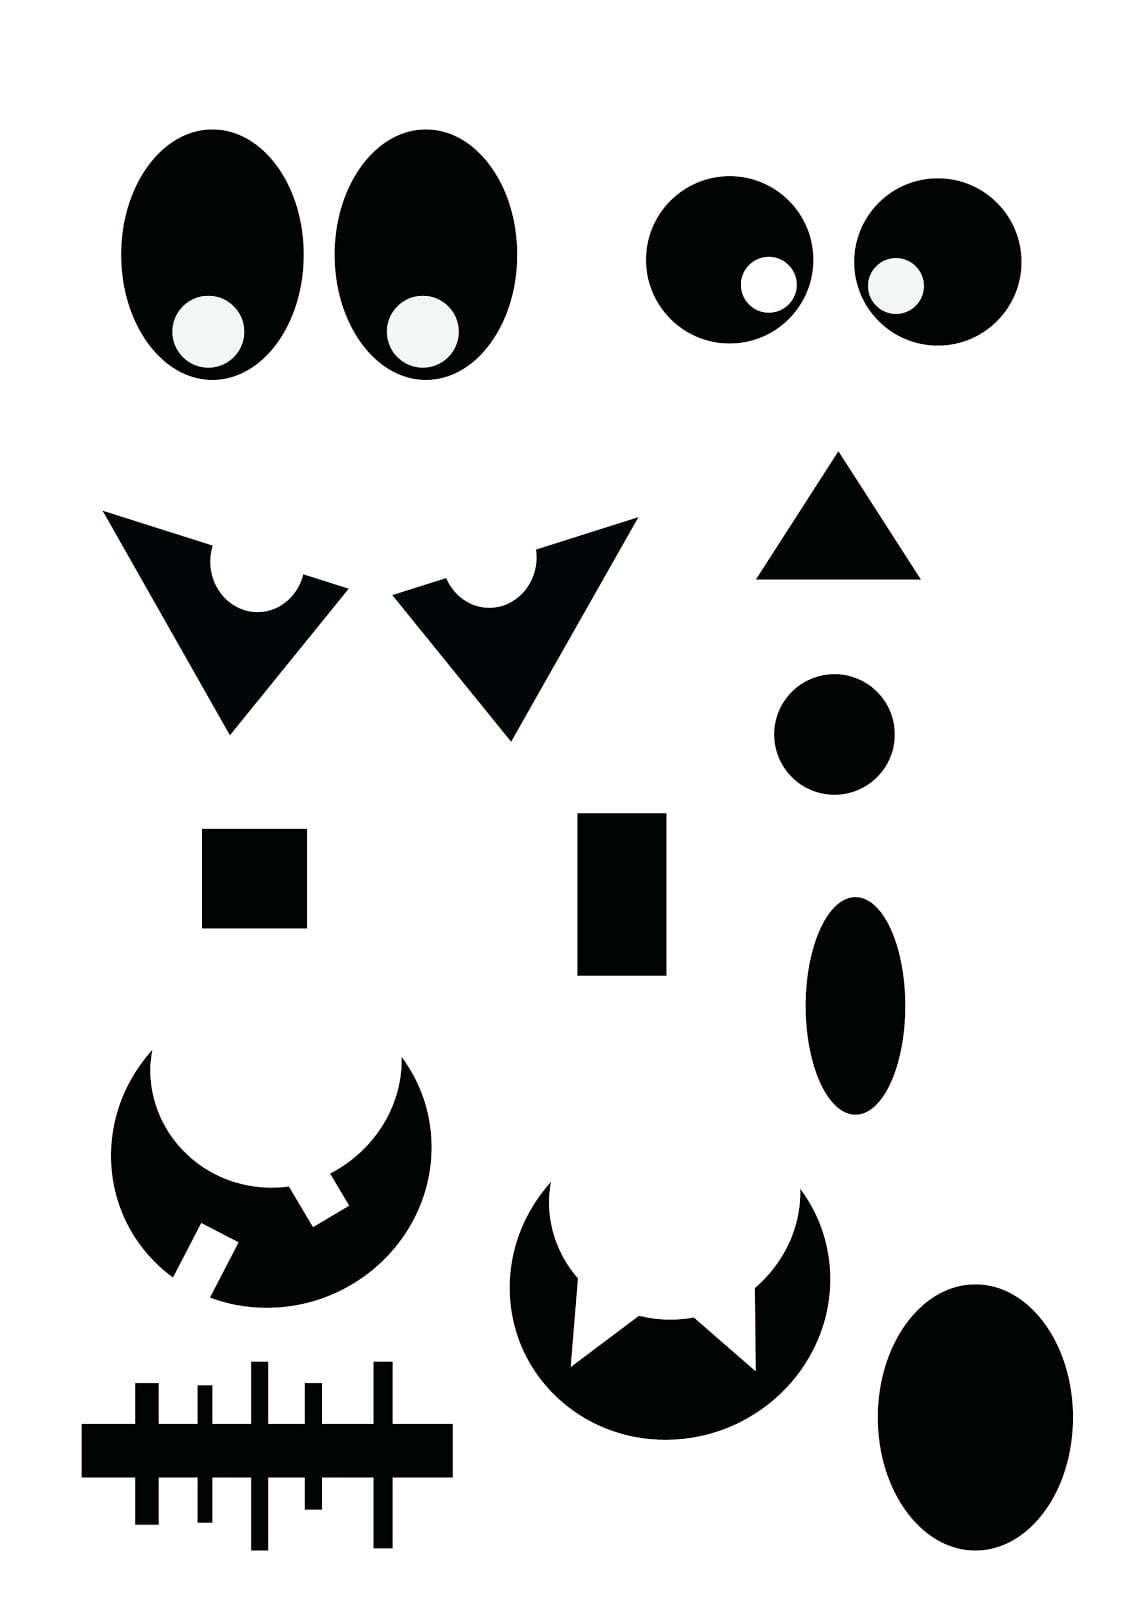 Ghost Face Template Printable